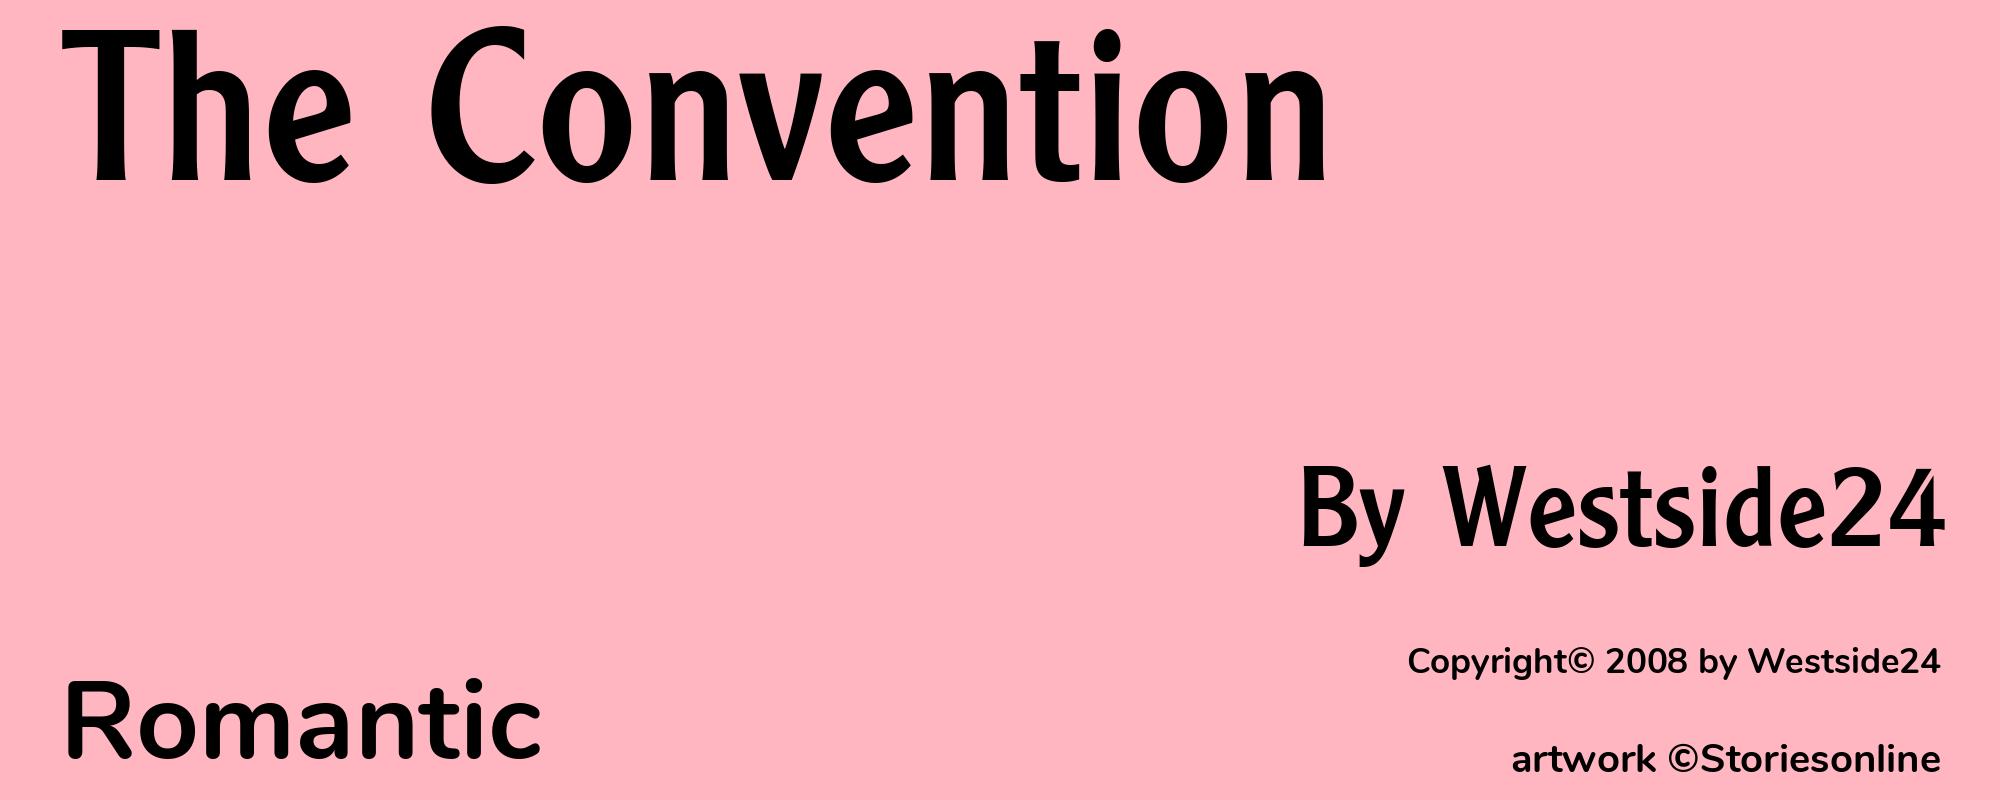 The Convention - Cover